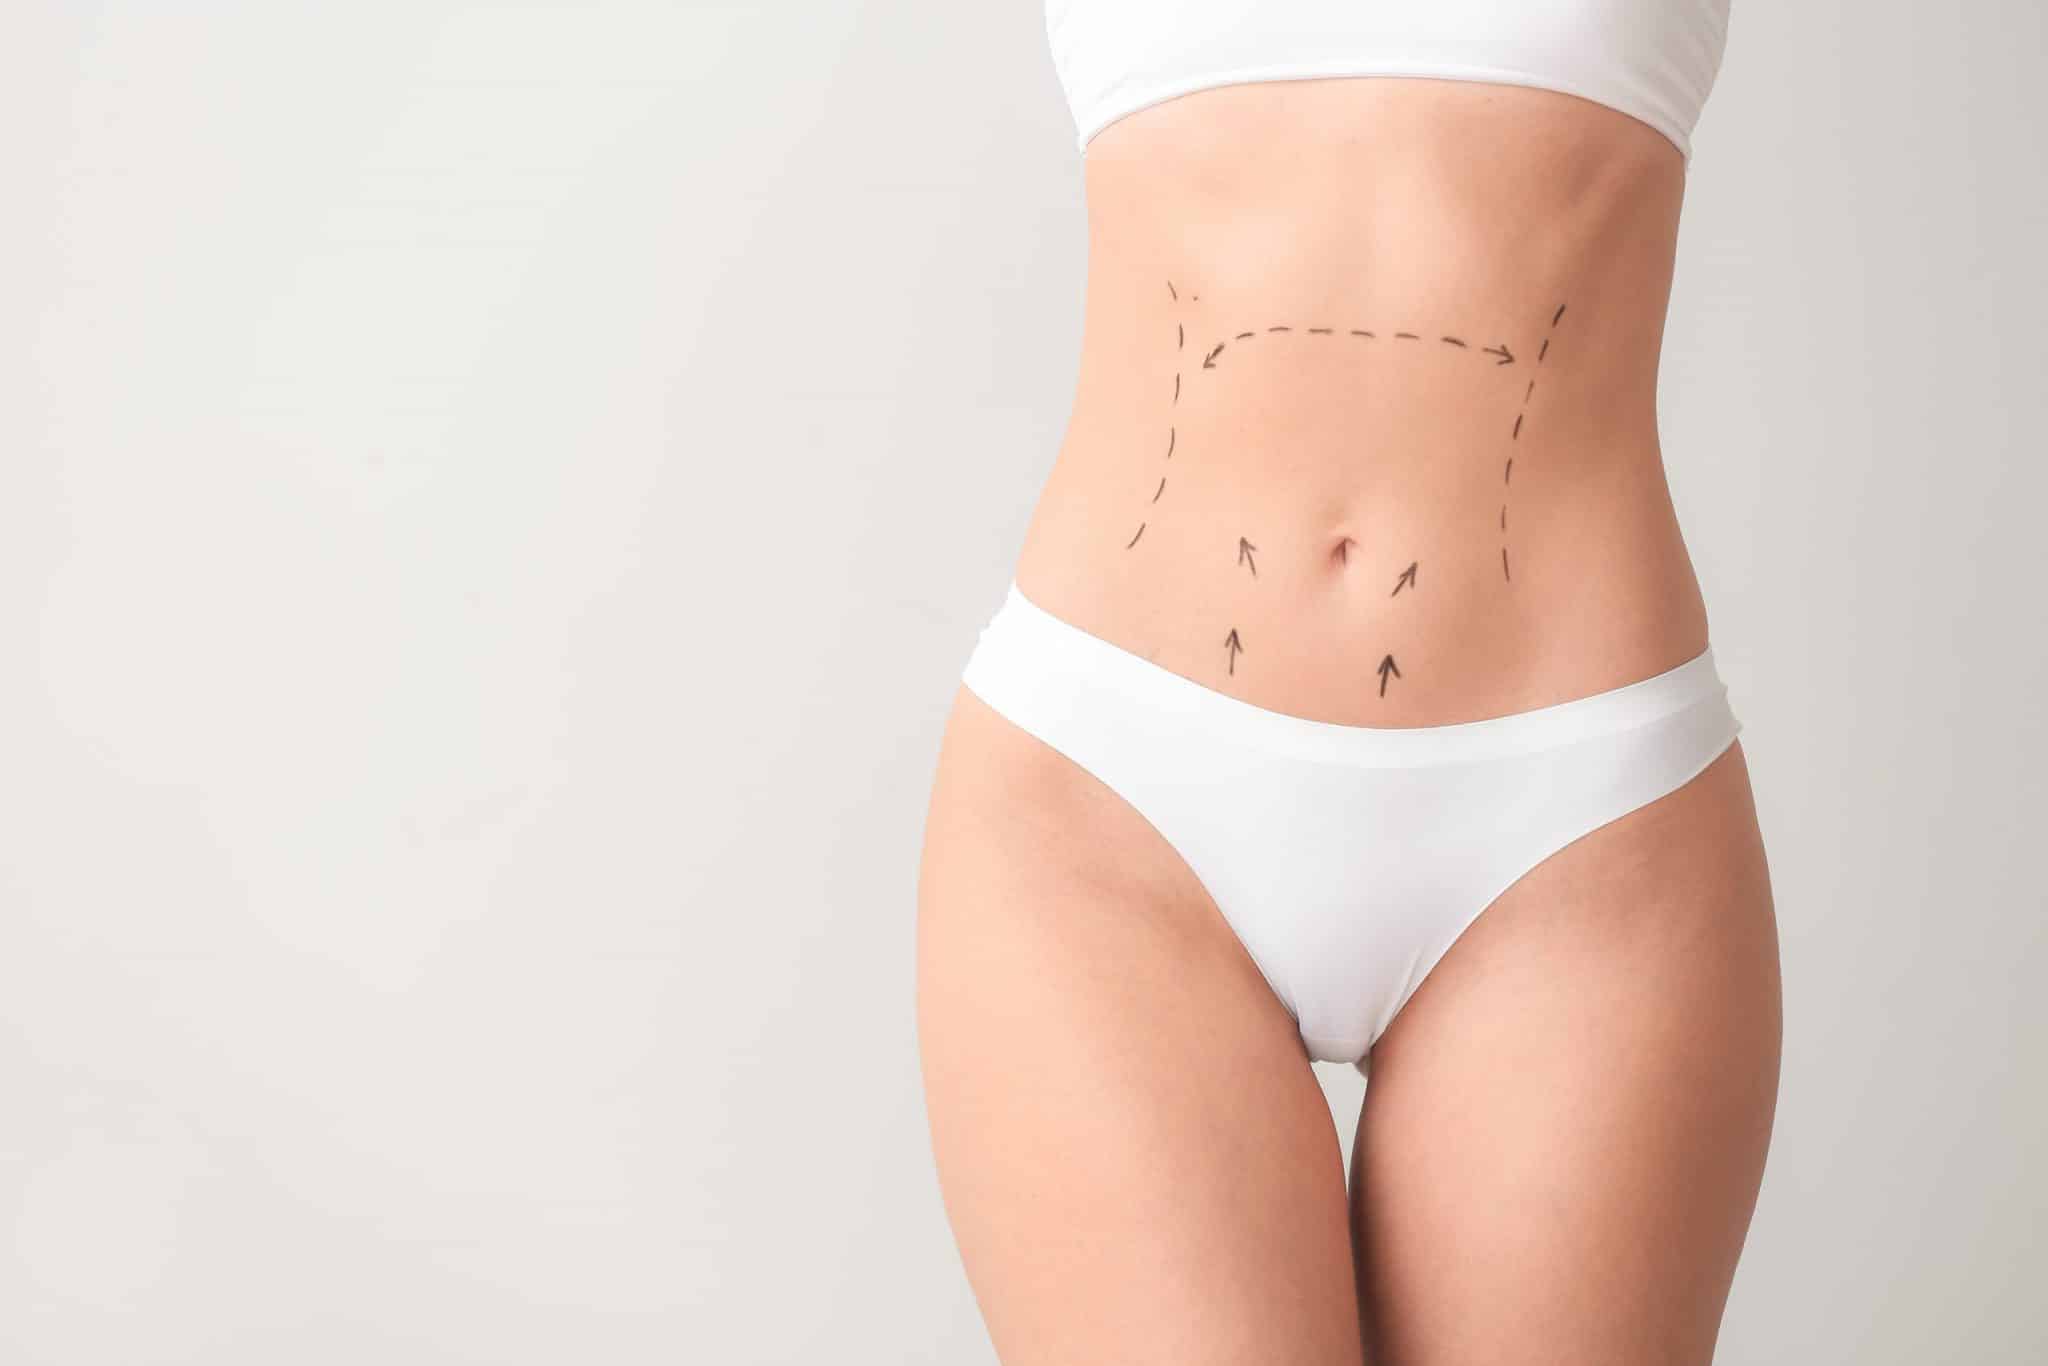 How Long Does It Take for Tummy Tuck Scars to Heal?